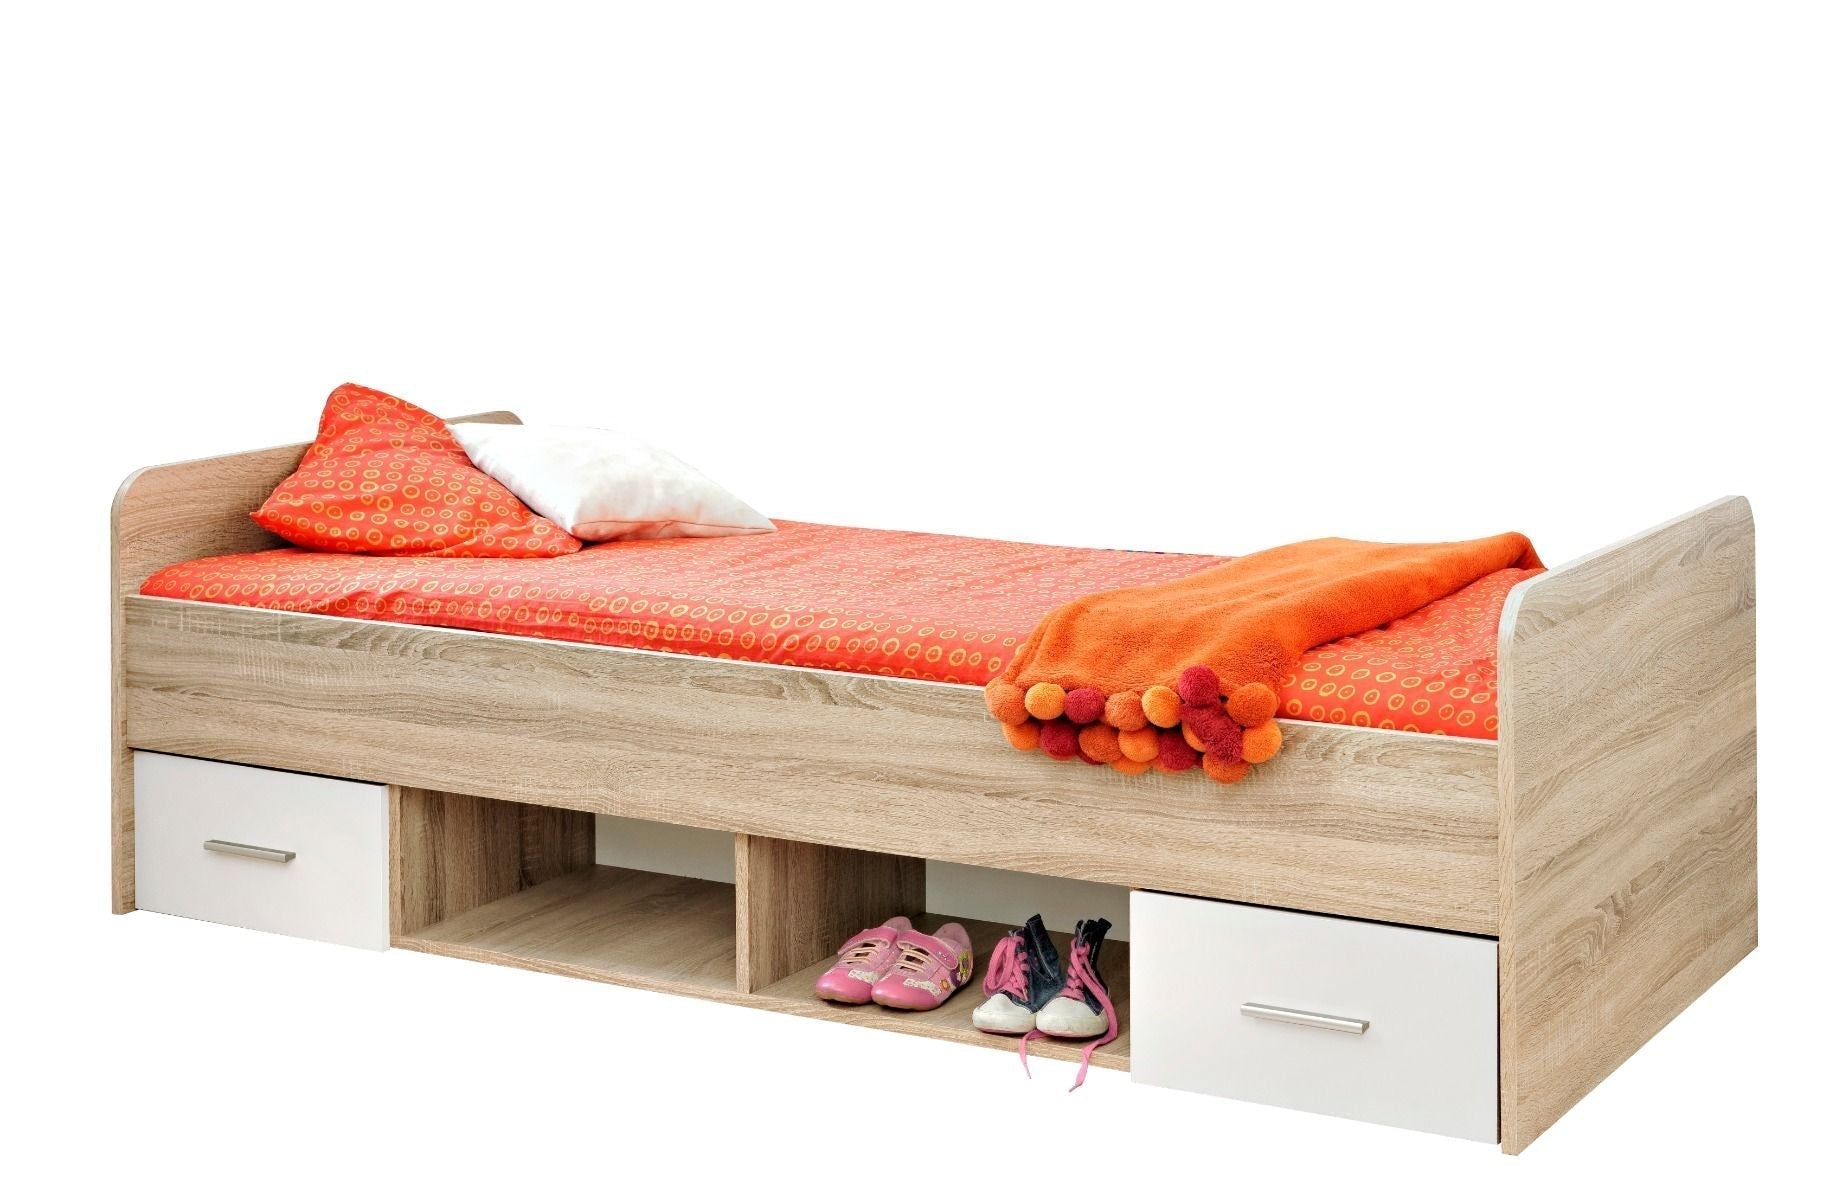 View Dino DI04 Bed with Drawers information